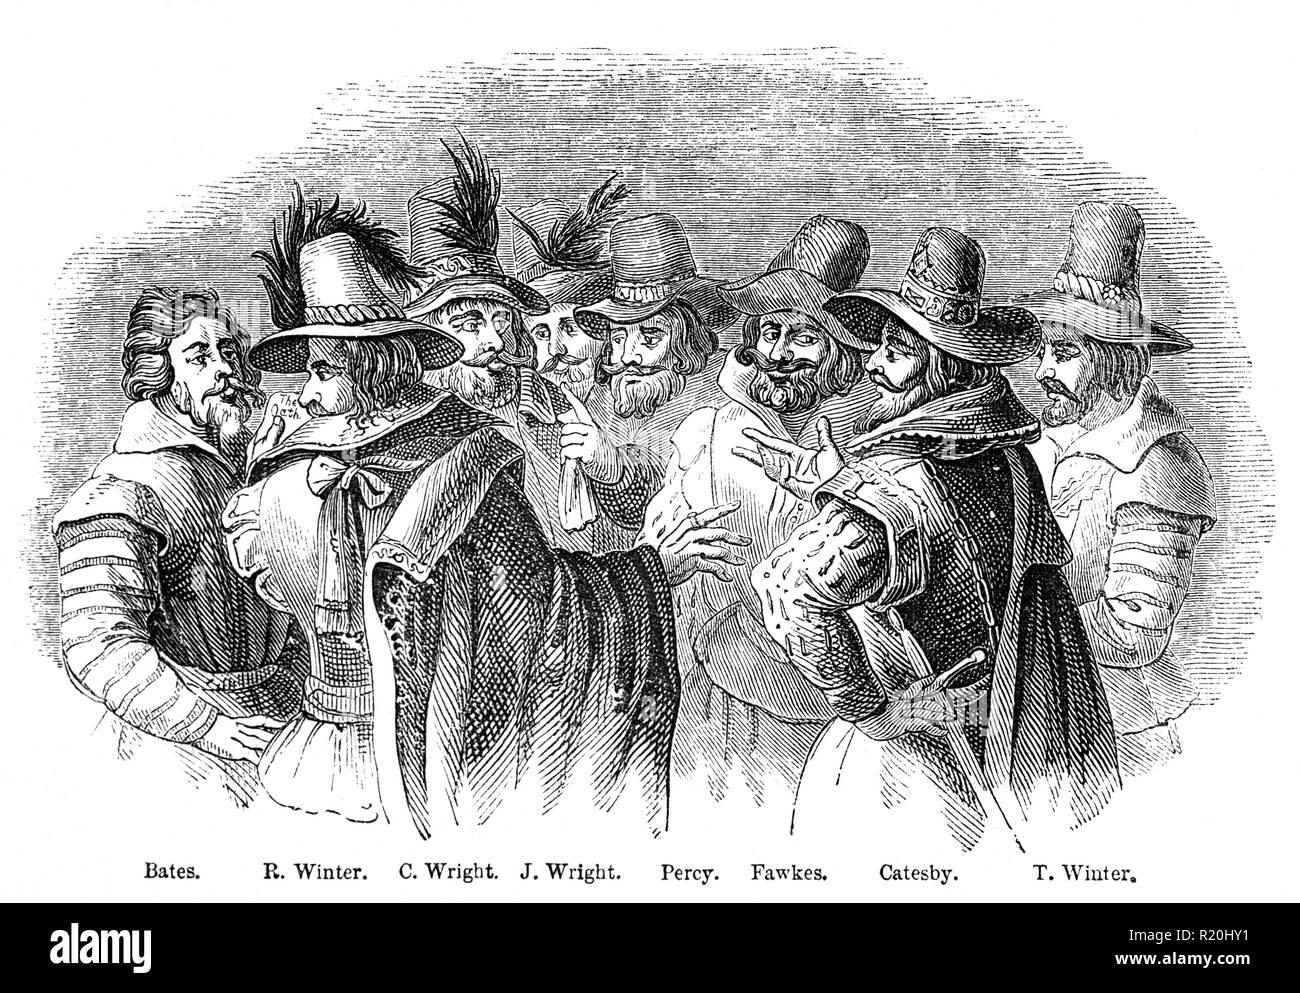 The conspirators involved in the Gunpowder Plot of 1605, aka the Gunpowder Treason Plot, or the Jesuit Treason. It was a failed assassination attempt against King James I by a group of provincial English Catholics led by Robert Catesby.  The plan was to blow up the House of Lords during the State Opening of Parliament on 5 November 1605, as the prelude to a popular revolt in the Midlands during which James's nine-year-old daughter, Elizabeth, was to be installed as the Catholic head of state. Stock Photo